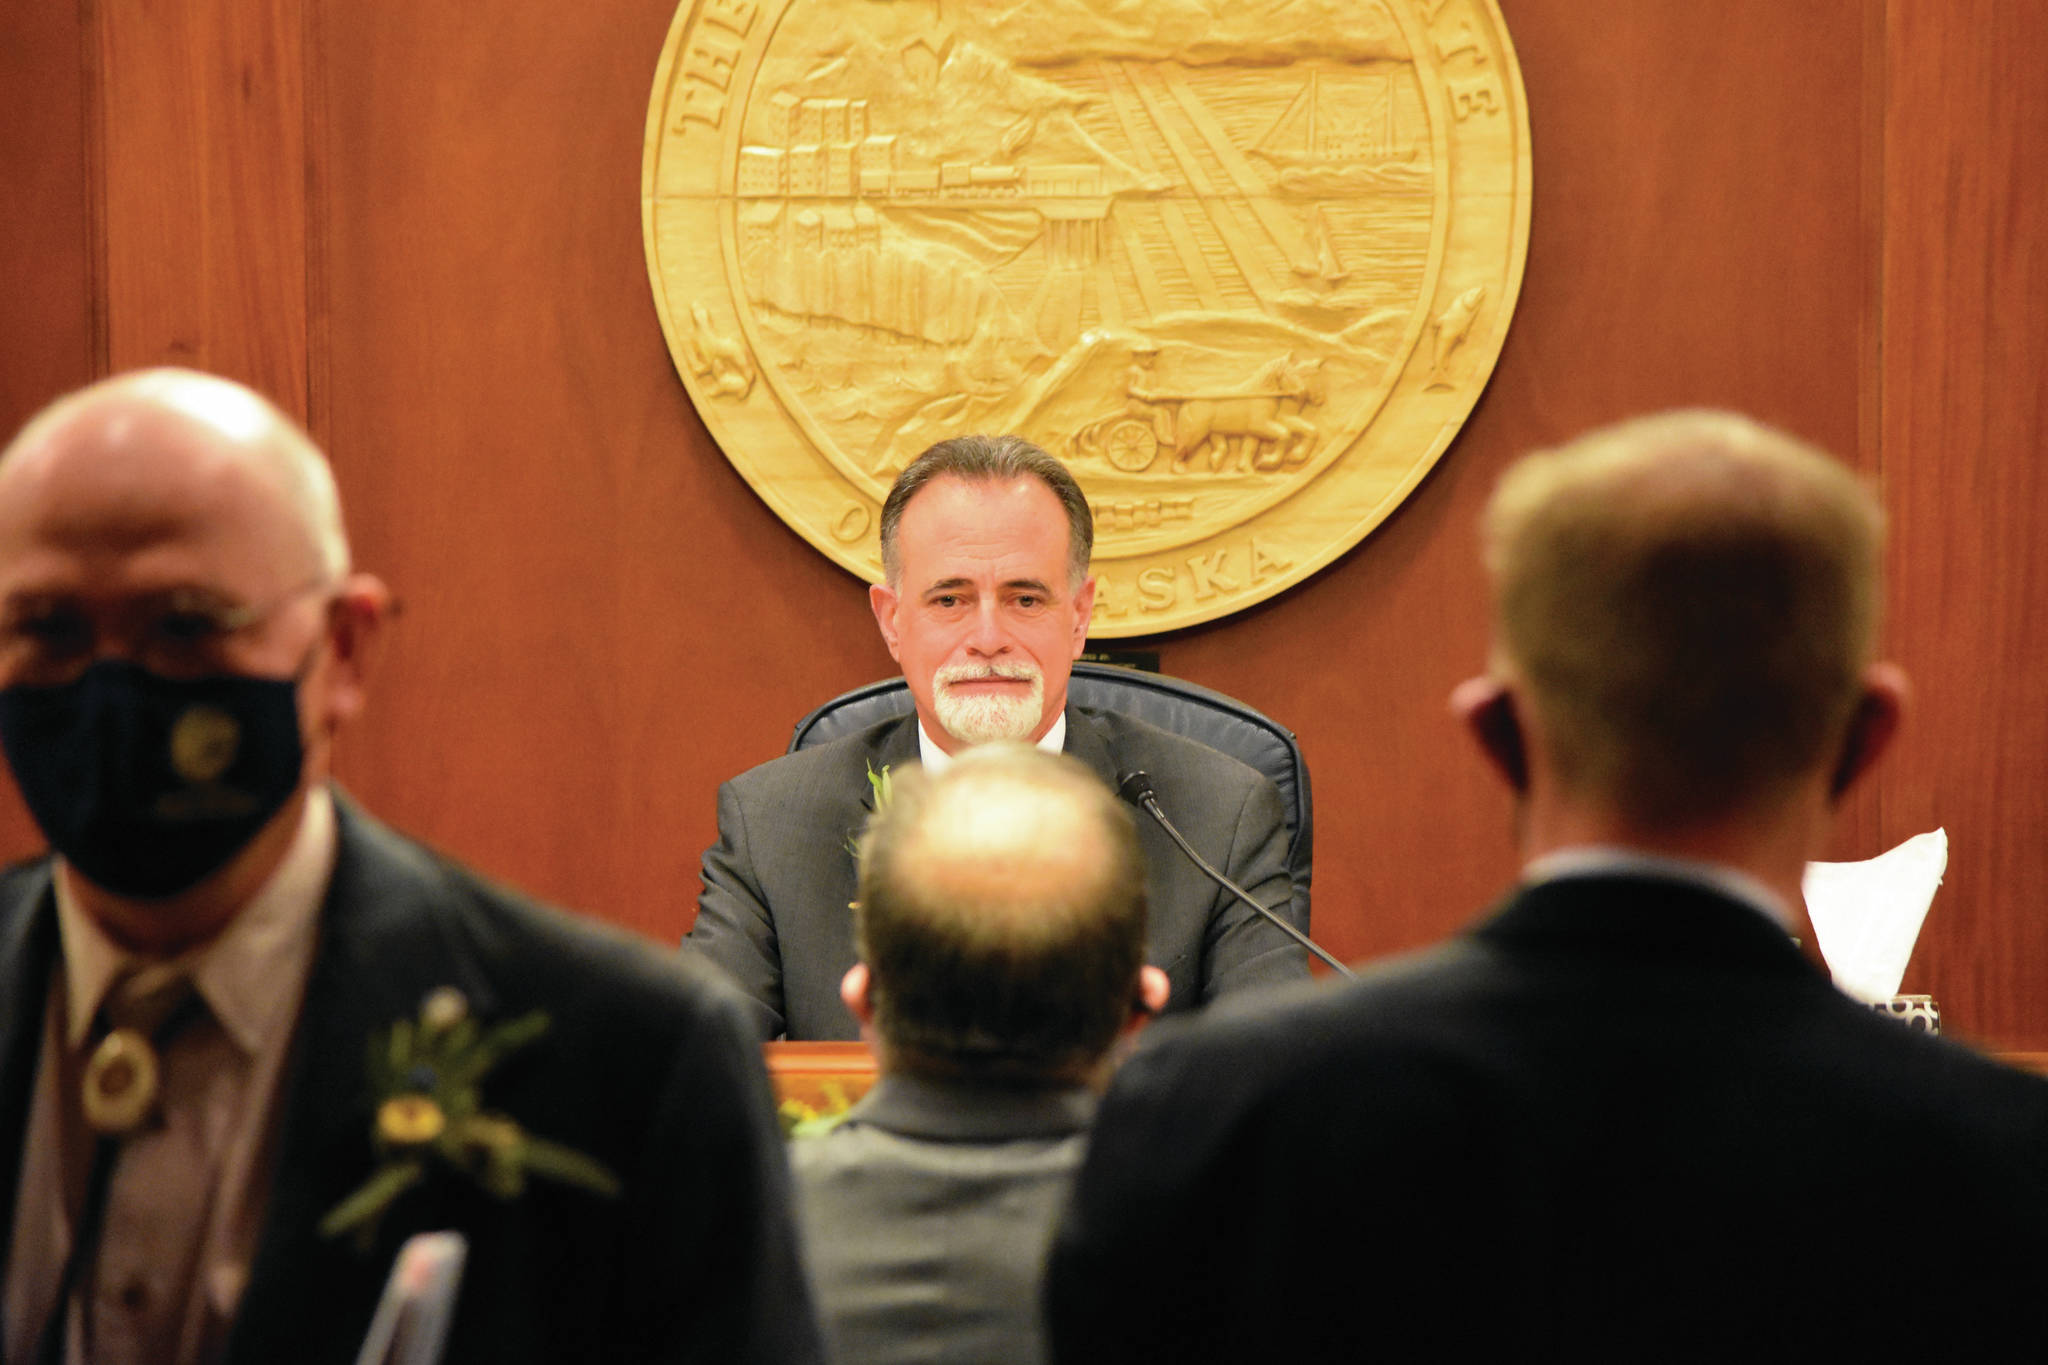 Senate President Peter Micciche, R-Soldotna, has his picture taken by a fellow senator after being unanimously elected on the first day of the 32nd Alaska Legislature on Tuesday, Jan. 19, 2021, in Juneau, Alaska. (Peter Segall/The Juneau Empire via AP, Pool)